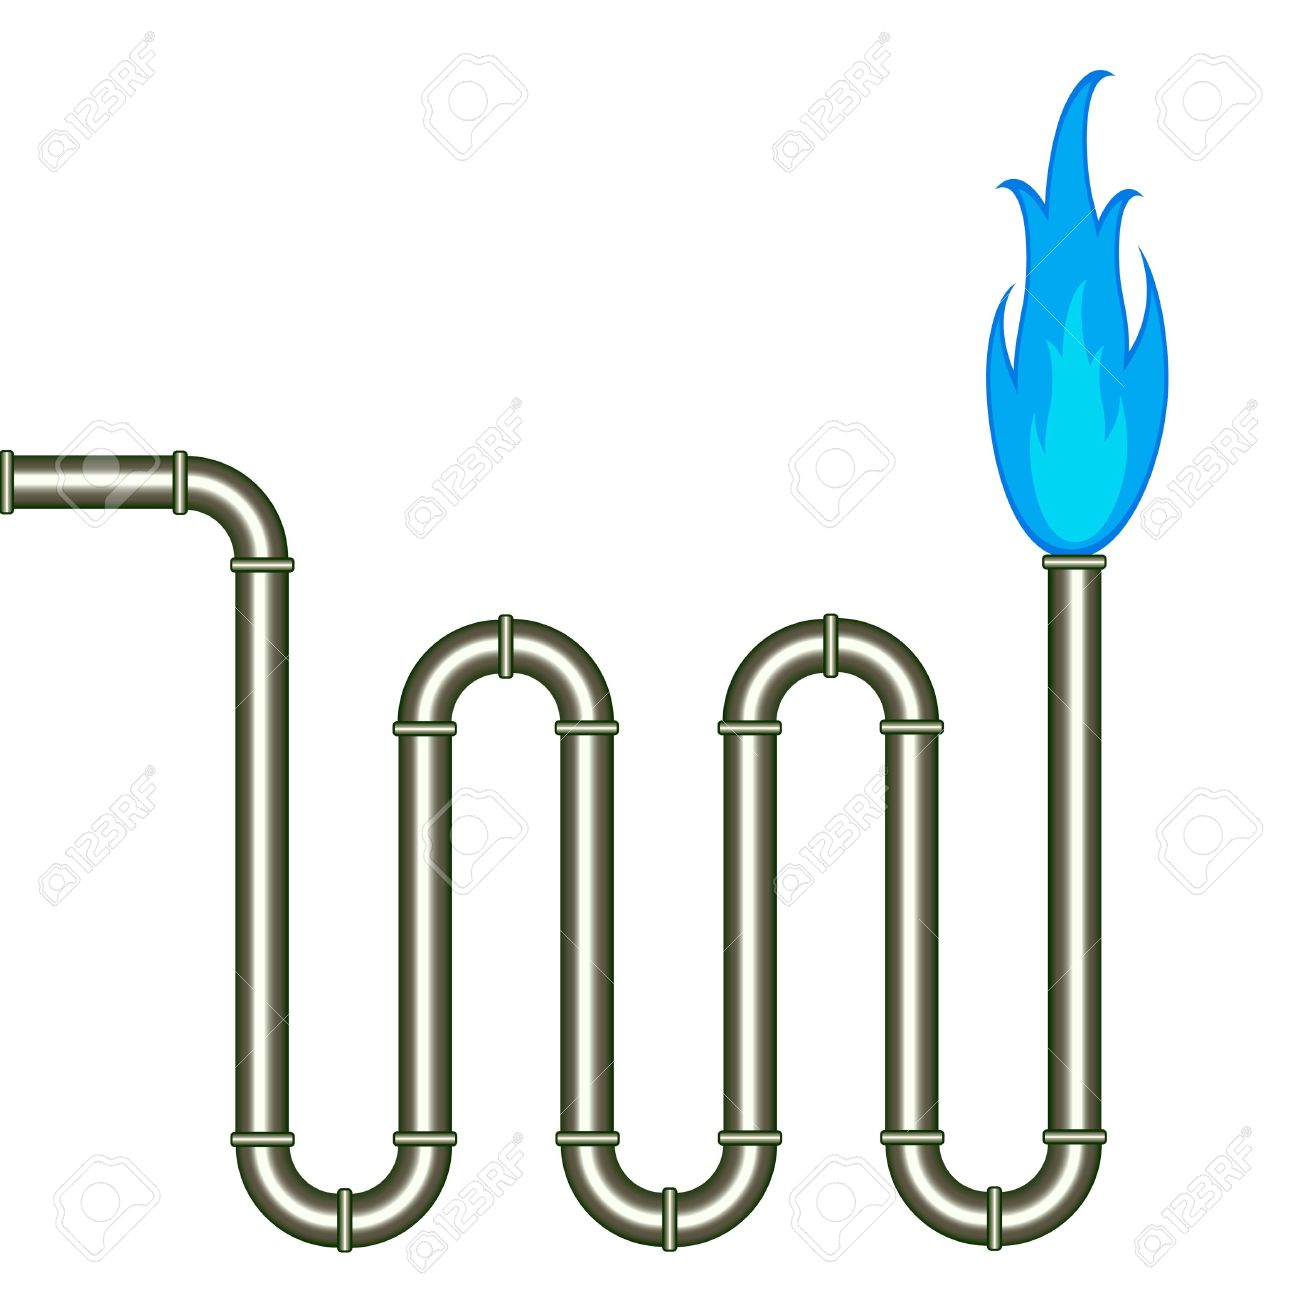 Vector Burning Pipe Royalty Free Cliparts, Vectors, And Stock.